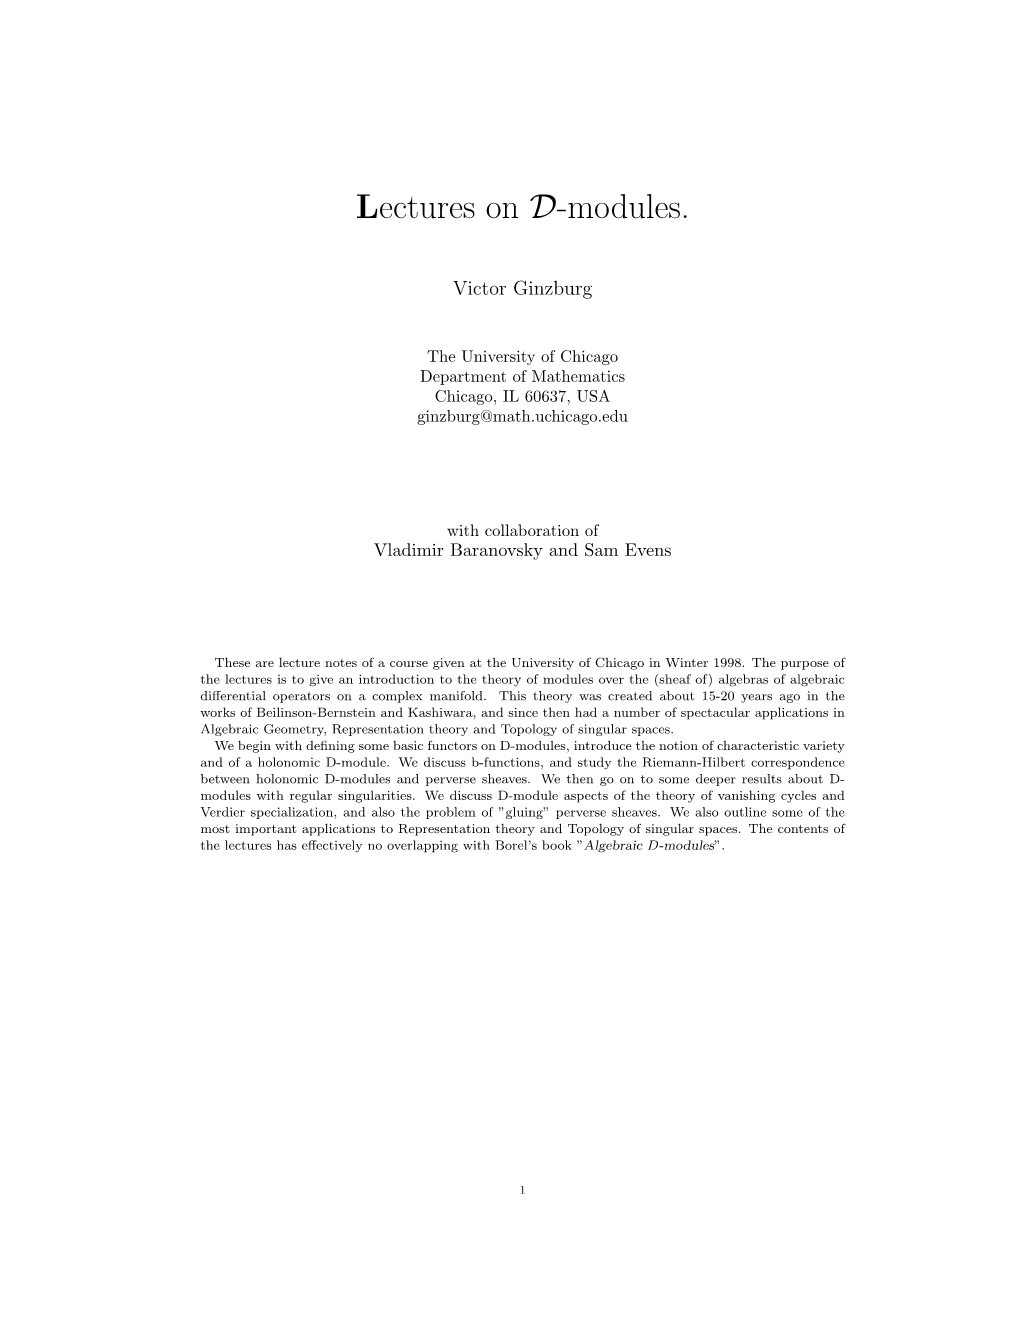 Lectures on D-Modules